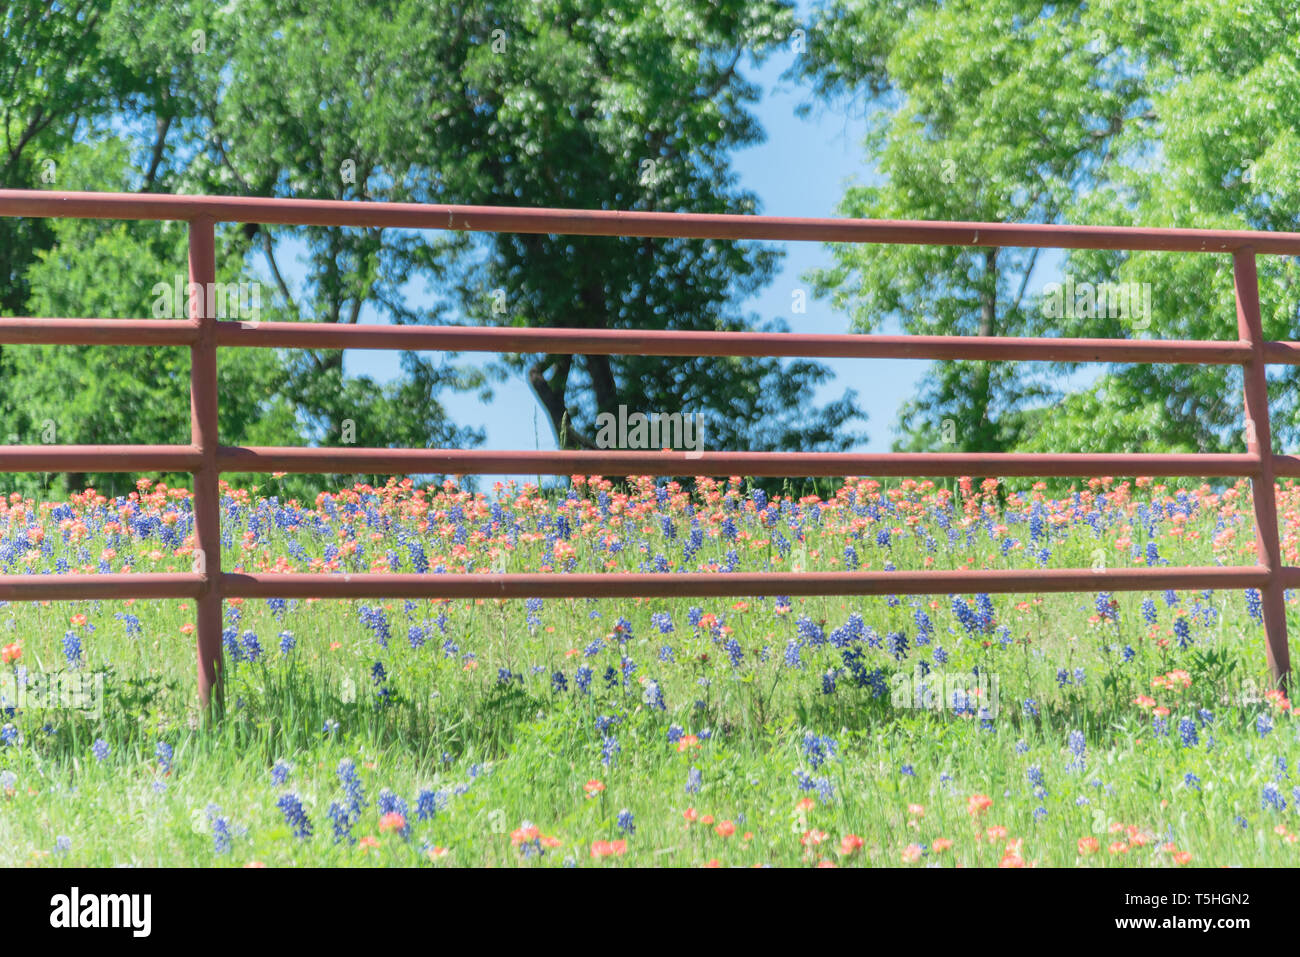 Indian Paintbrush and Bluebonnet blooming along old metal fence Stock Photo